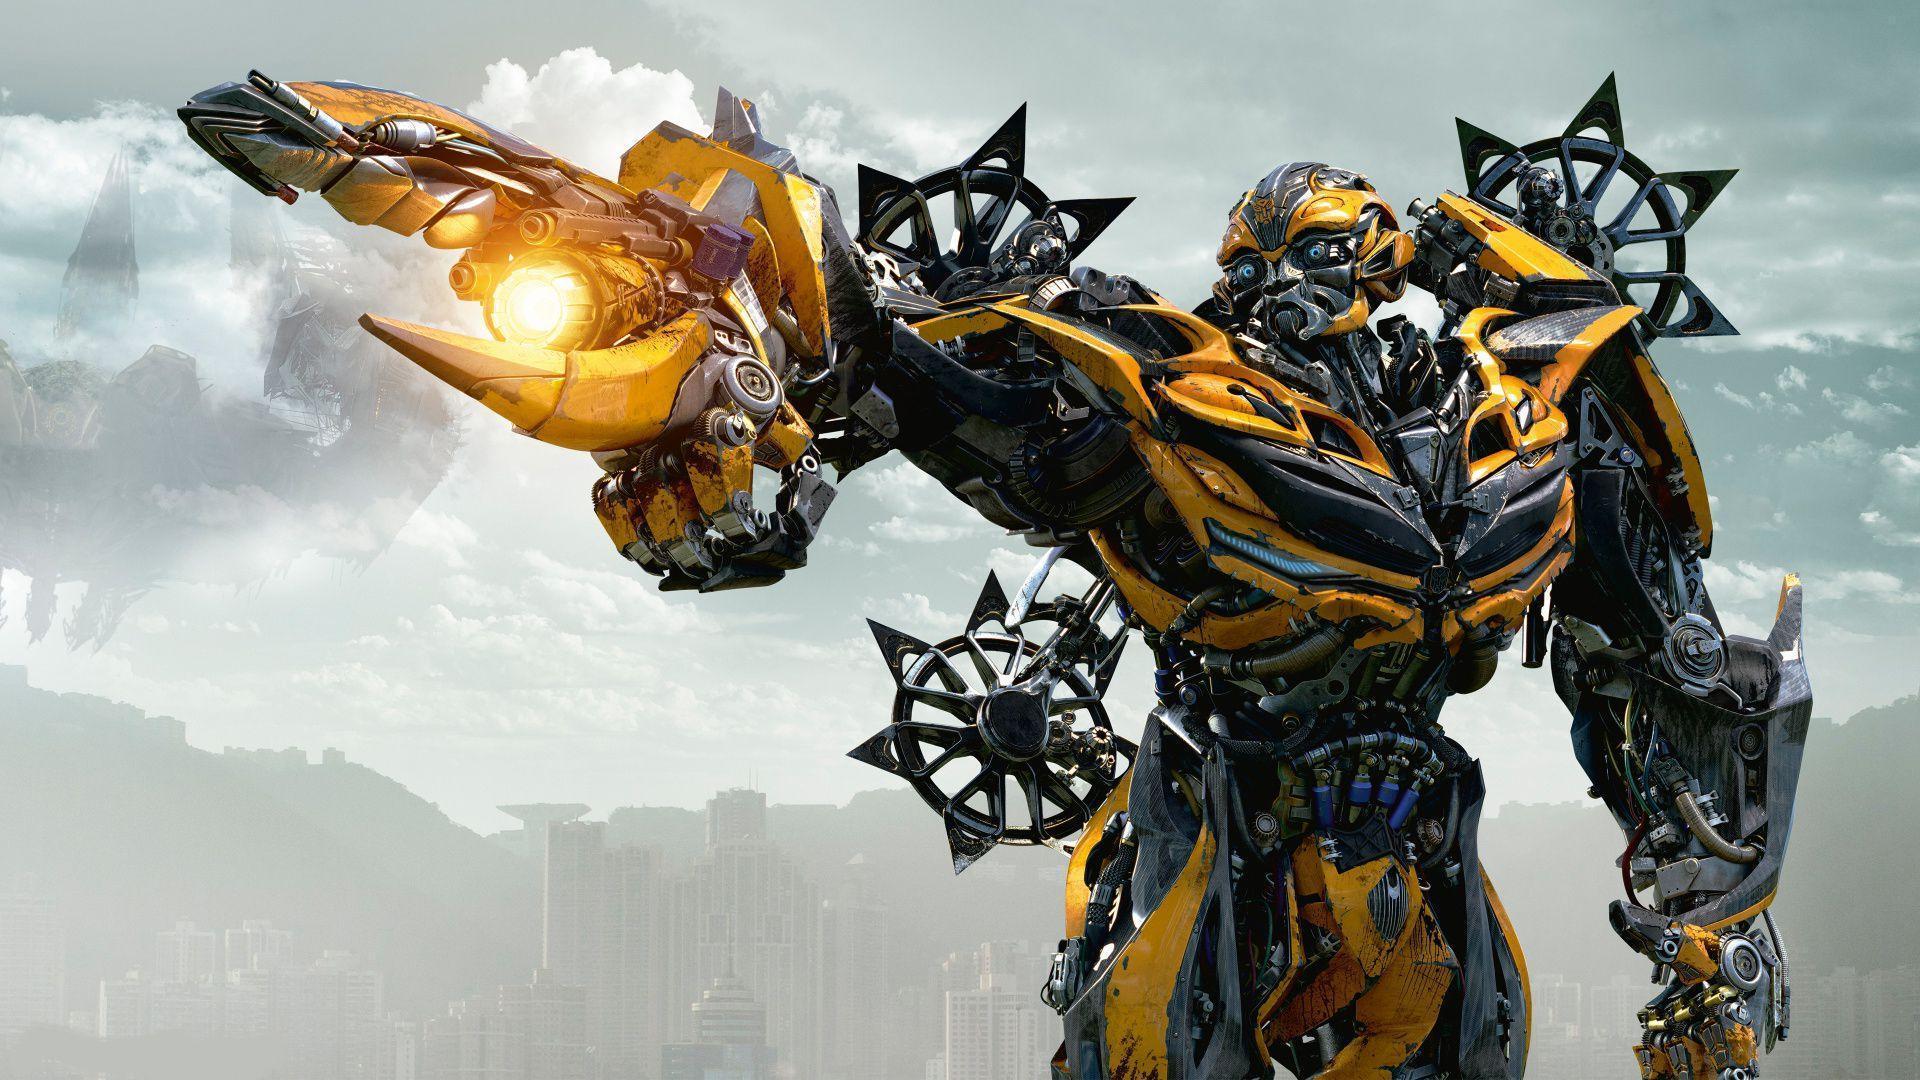 The 2018 'Transformers' Film Is Confirmed To Be A Bumblebee